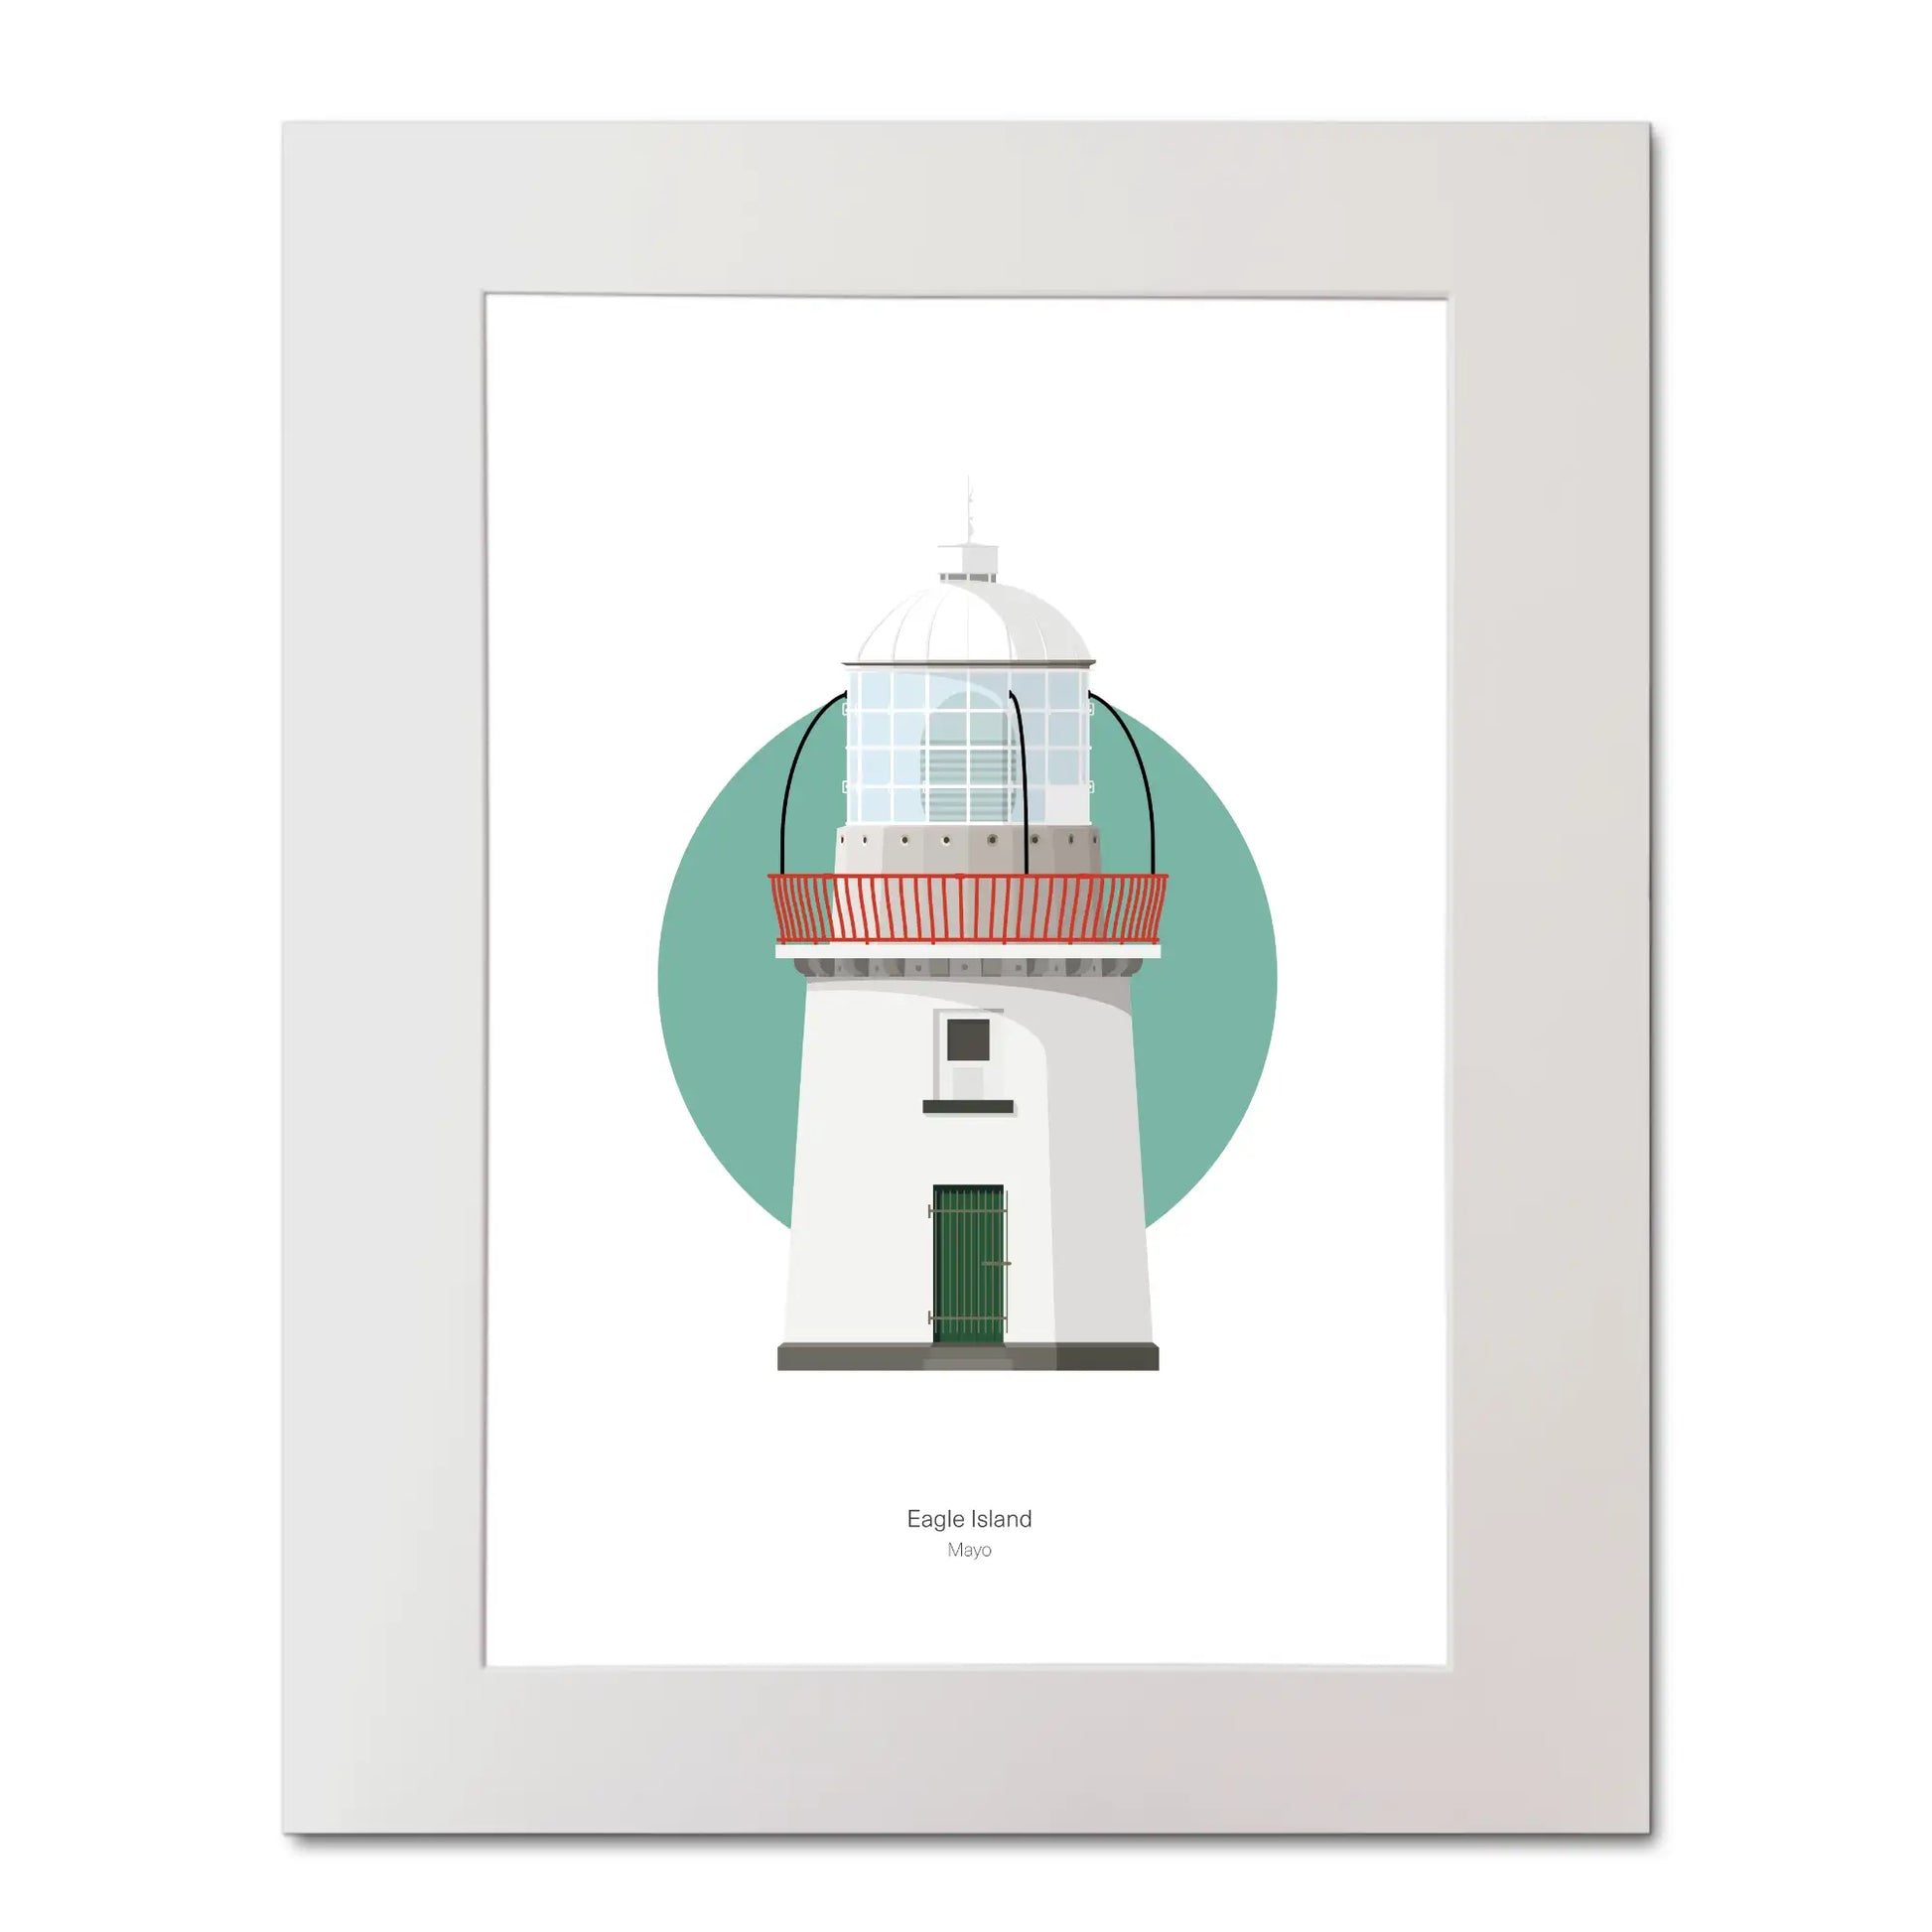 Contemporary illustration of Eagle Island lighthouse on a white background inside light blue square, mounted and measuring 40x50cm.